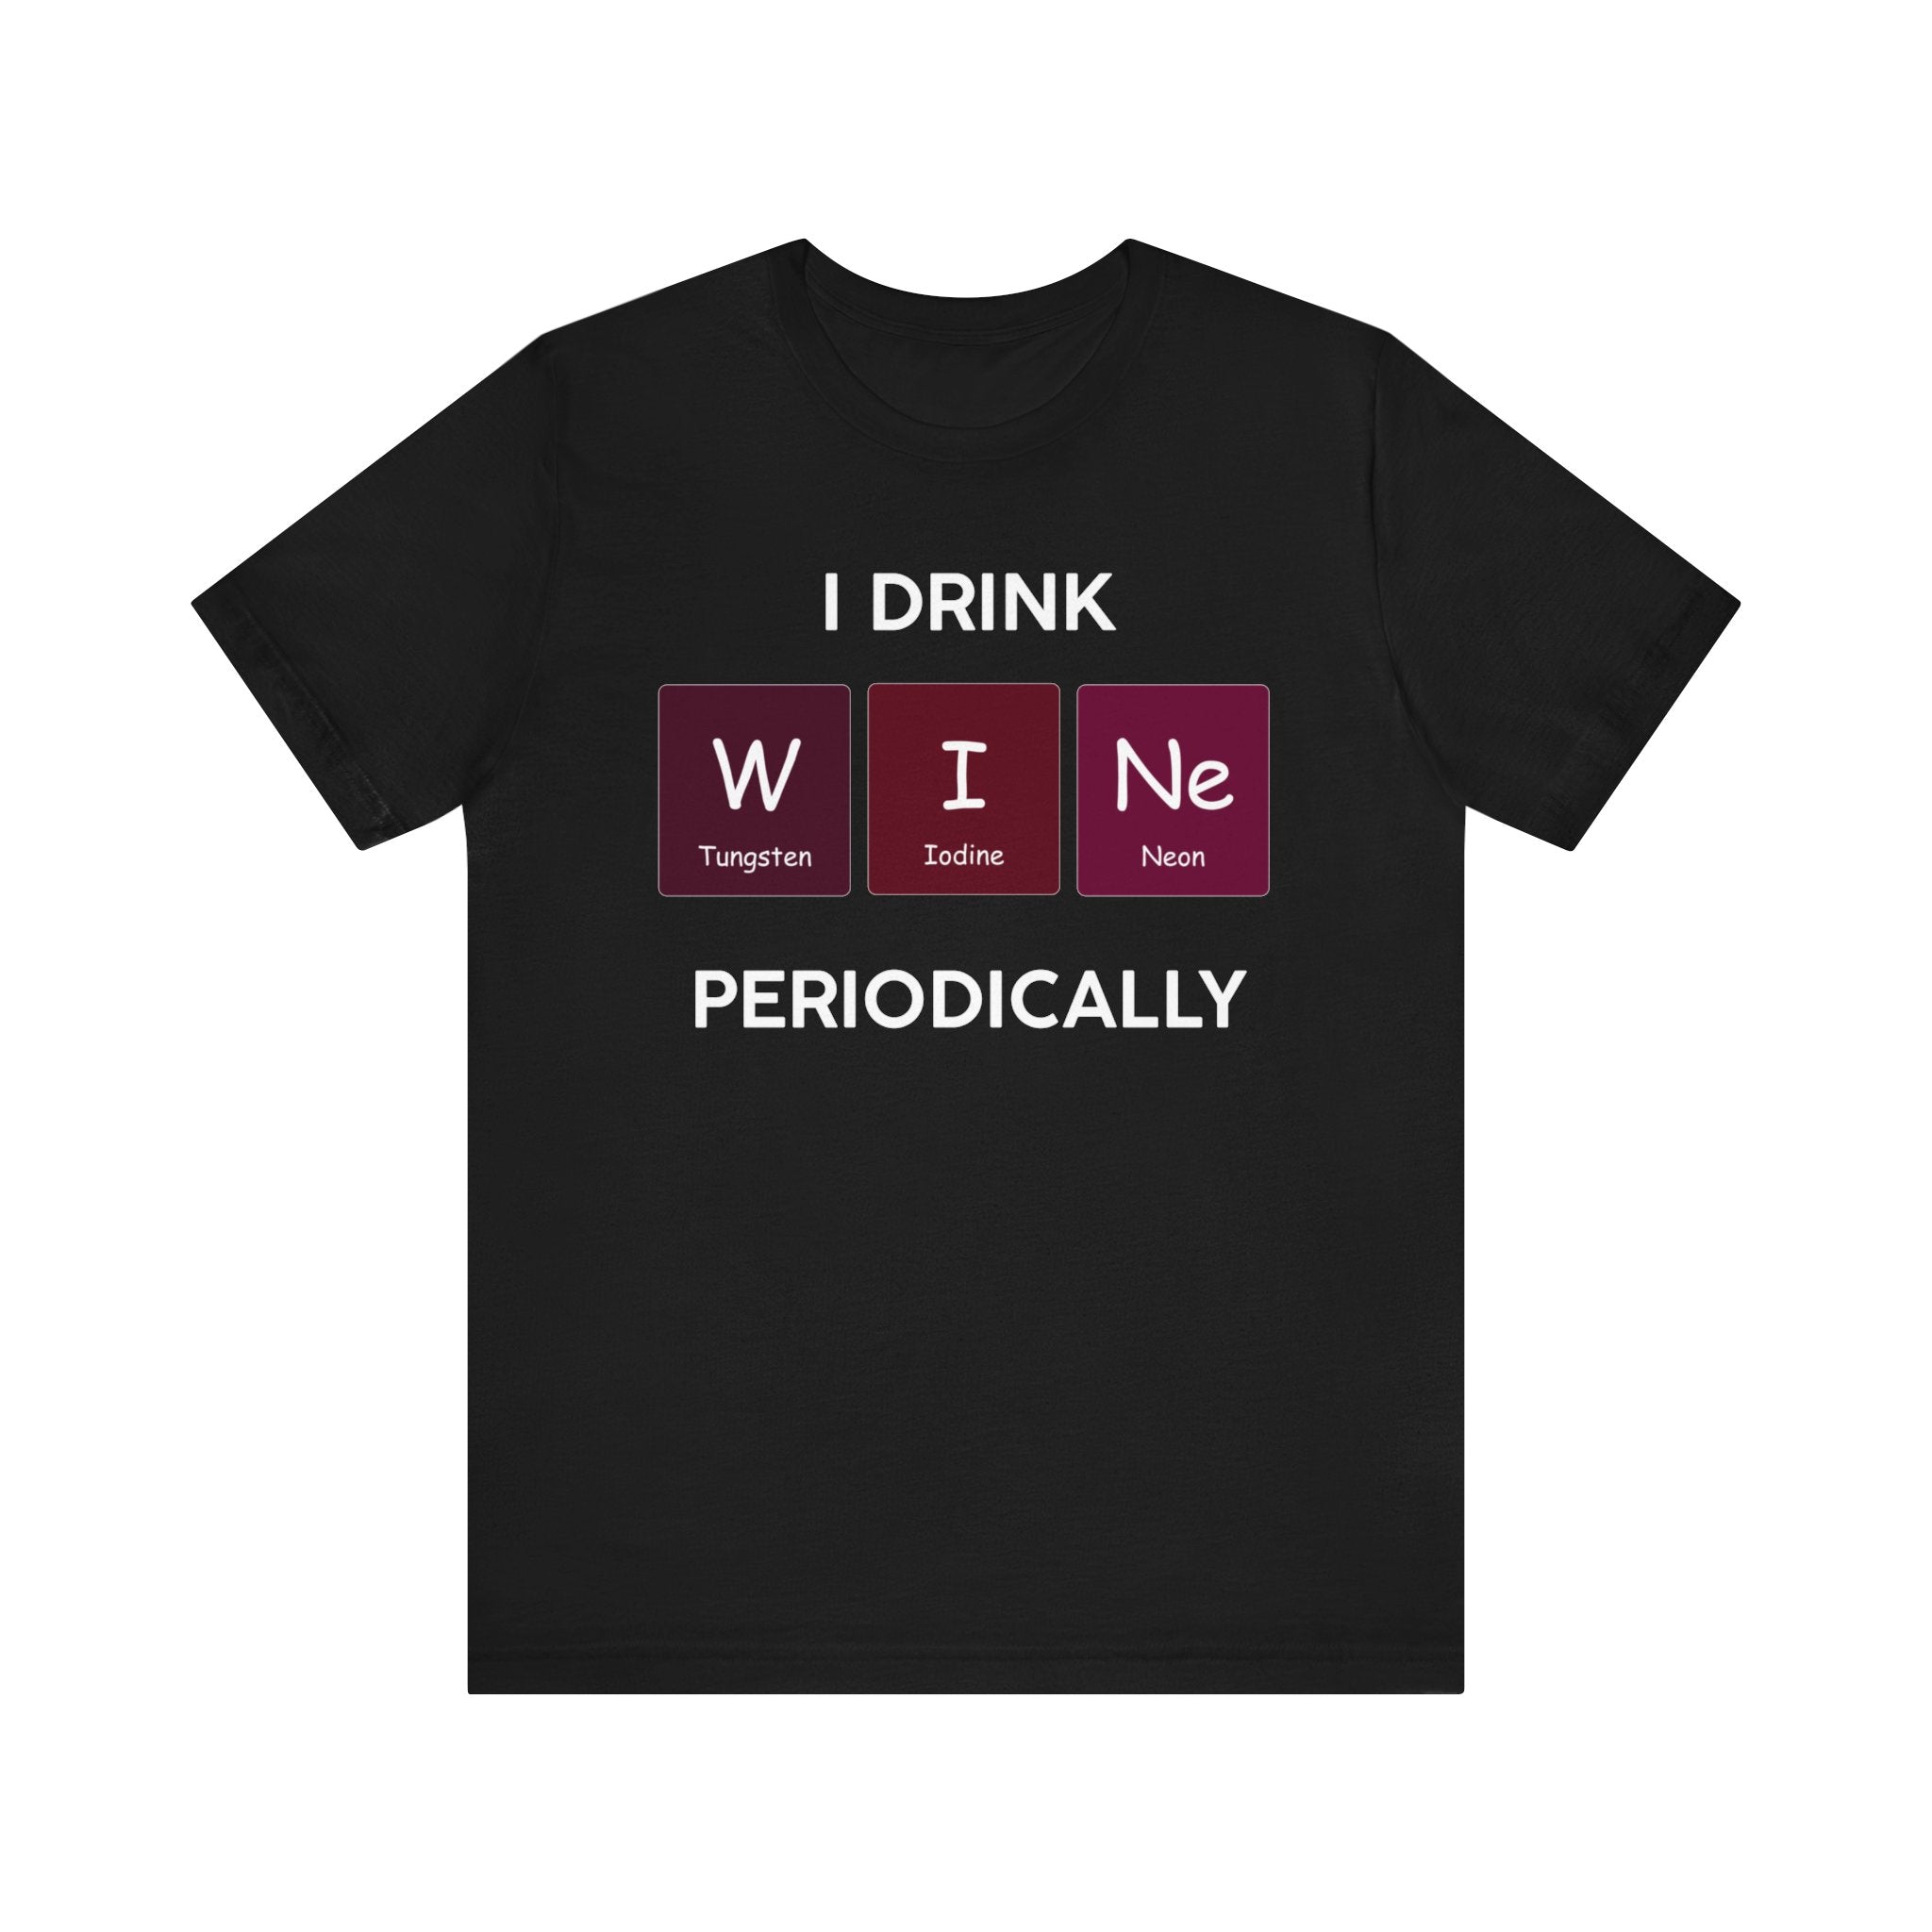 Black unisex jersey tee with the product name "I Drink W-I-Ne", featuring elements from the periodic table corresponding to the word "wine".